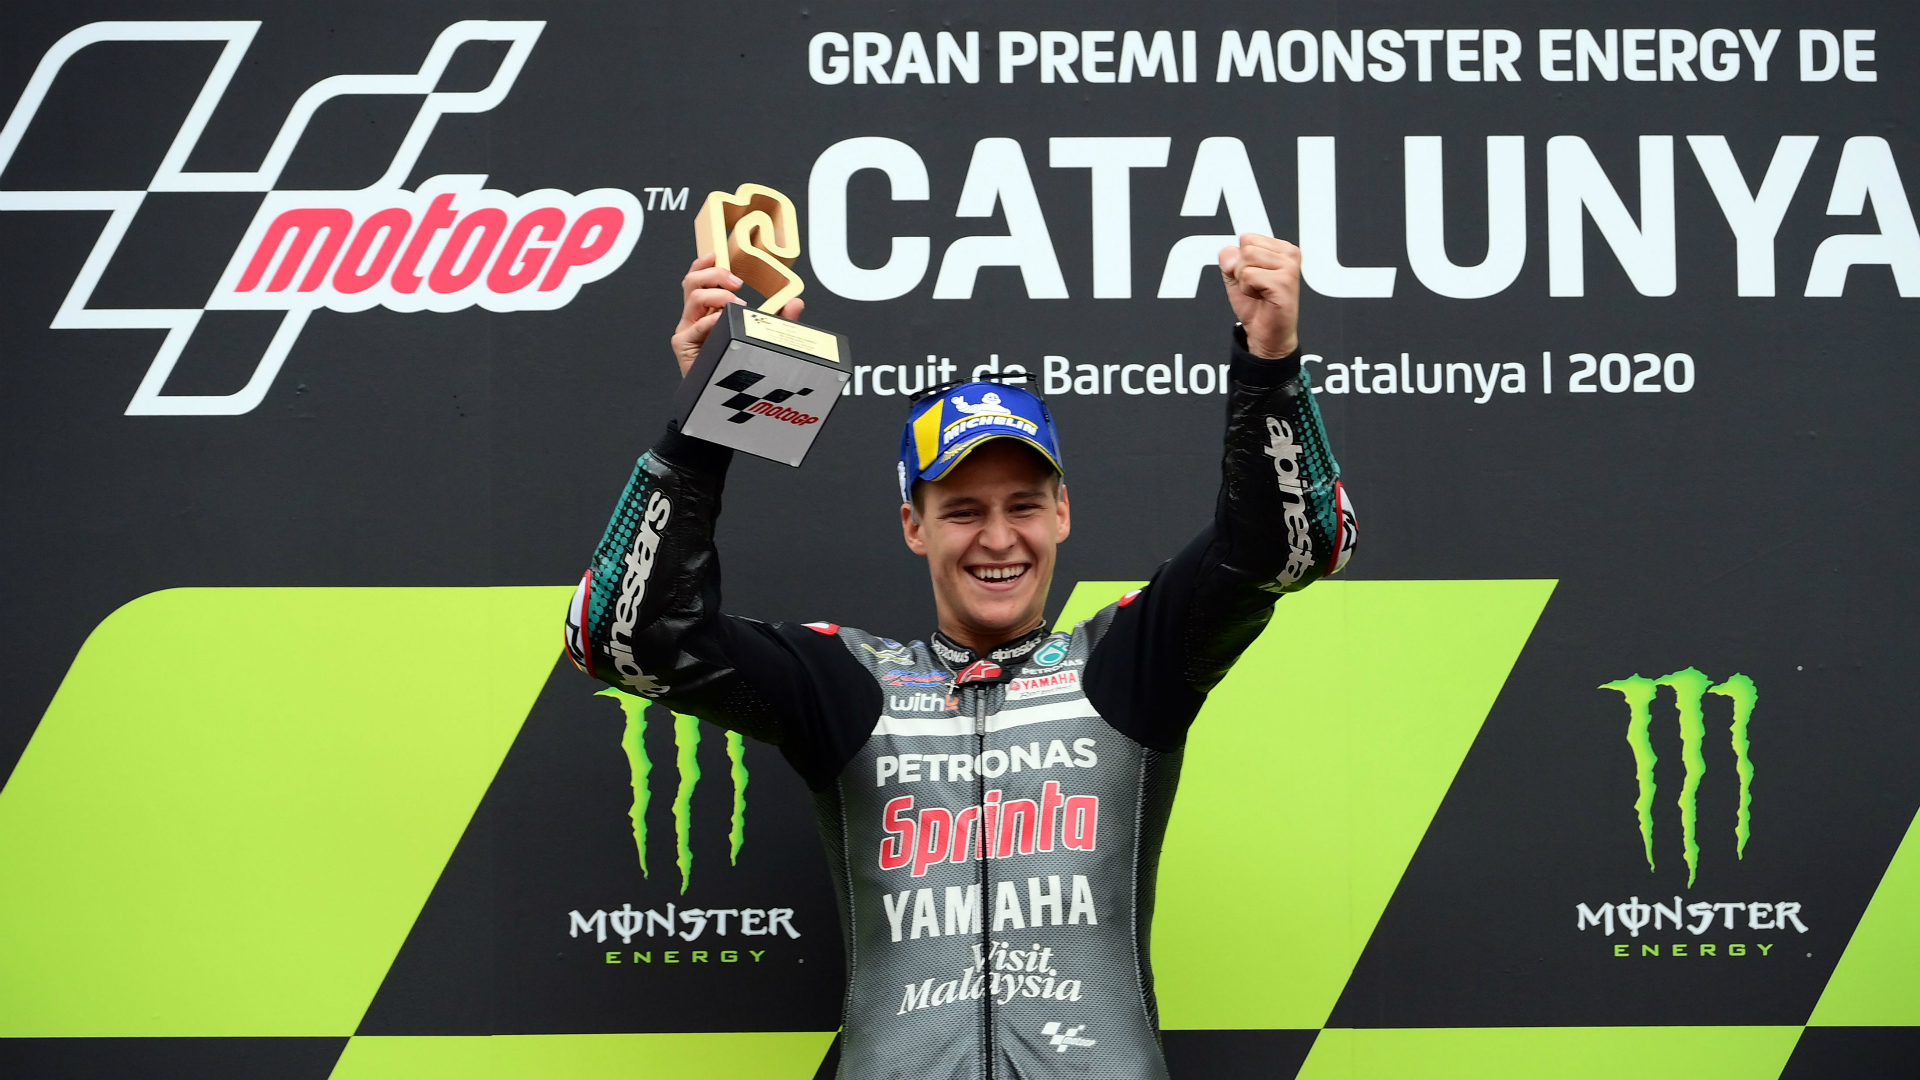 After winning the Catalan Grand Prix to regain the lead in the MotoGP standings, Fabio Quartararo expressed his relief.